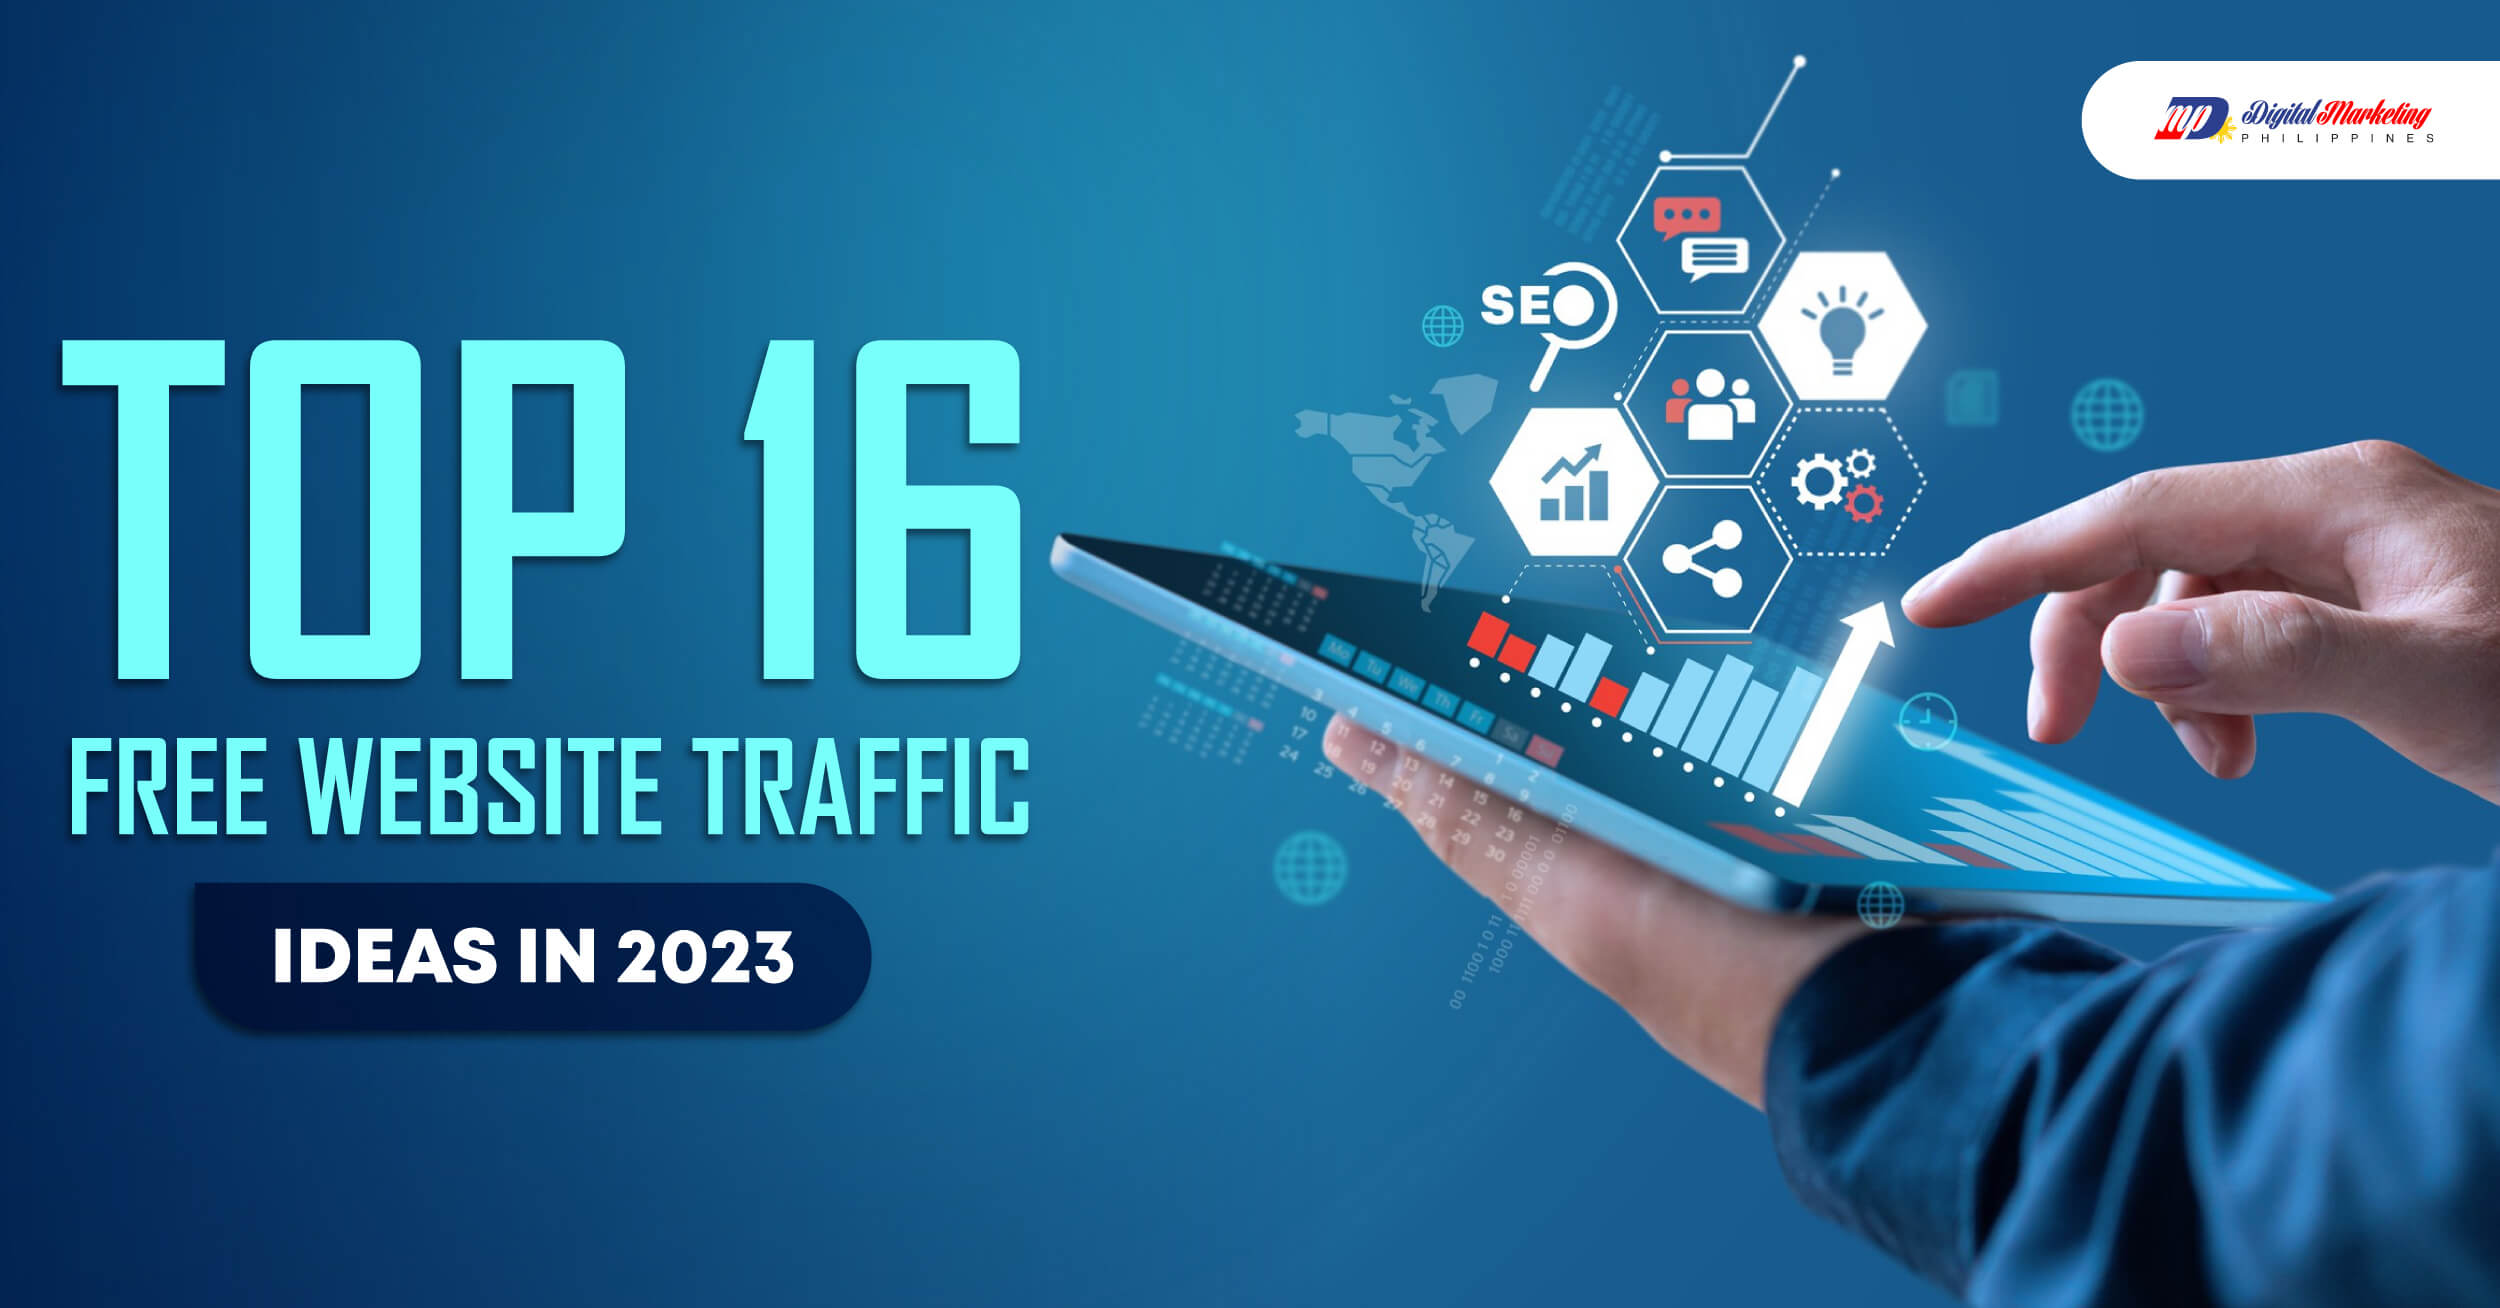 Top 16 Free Website Traffic Ideas in 2023 featured image